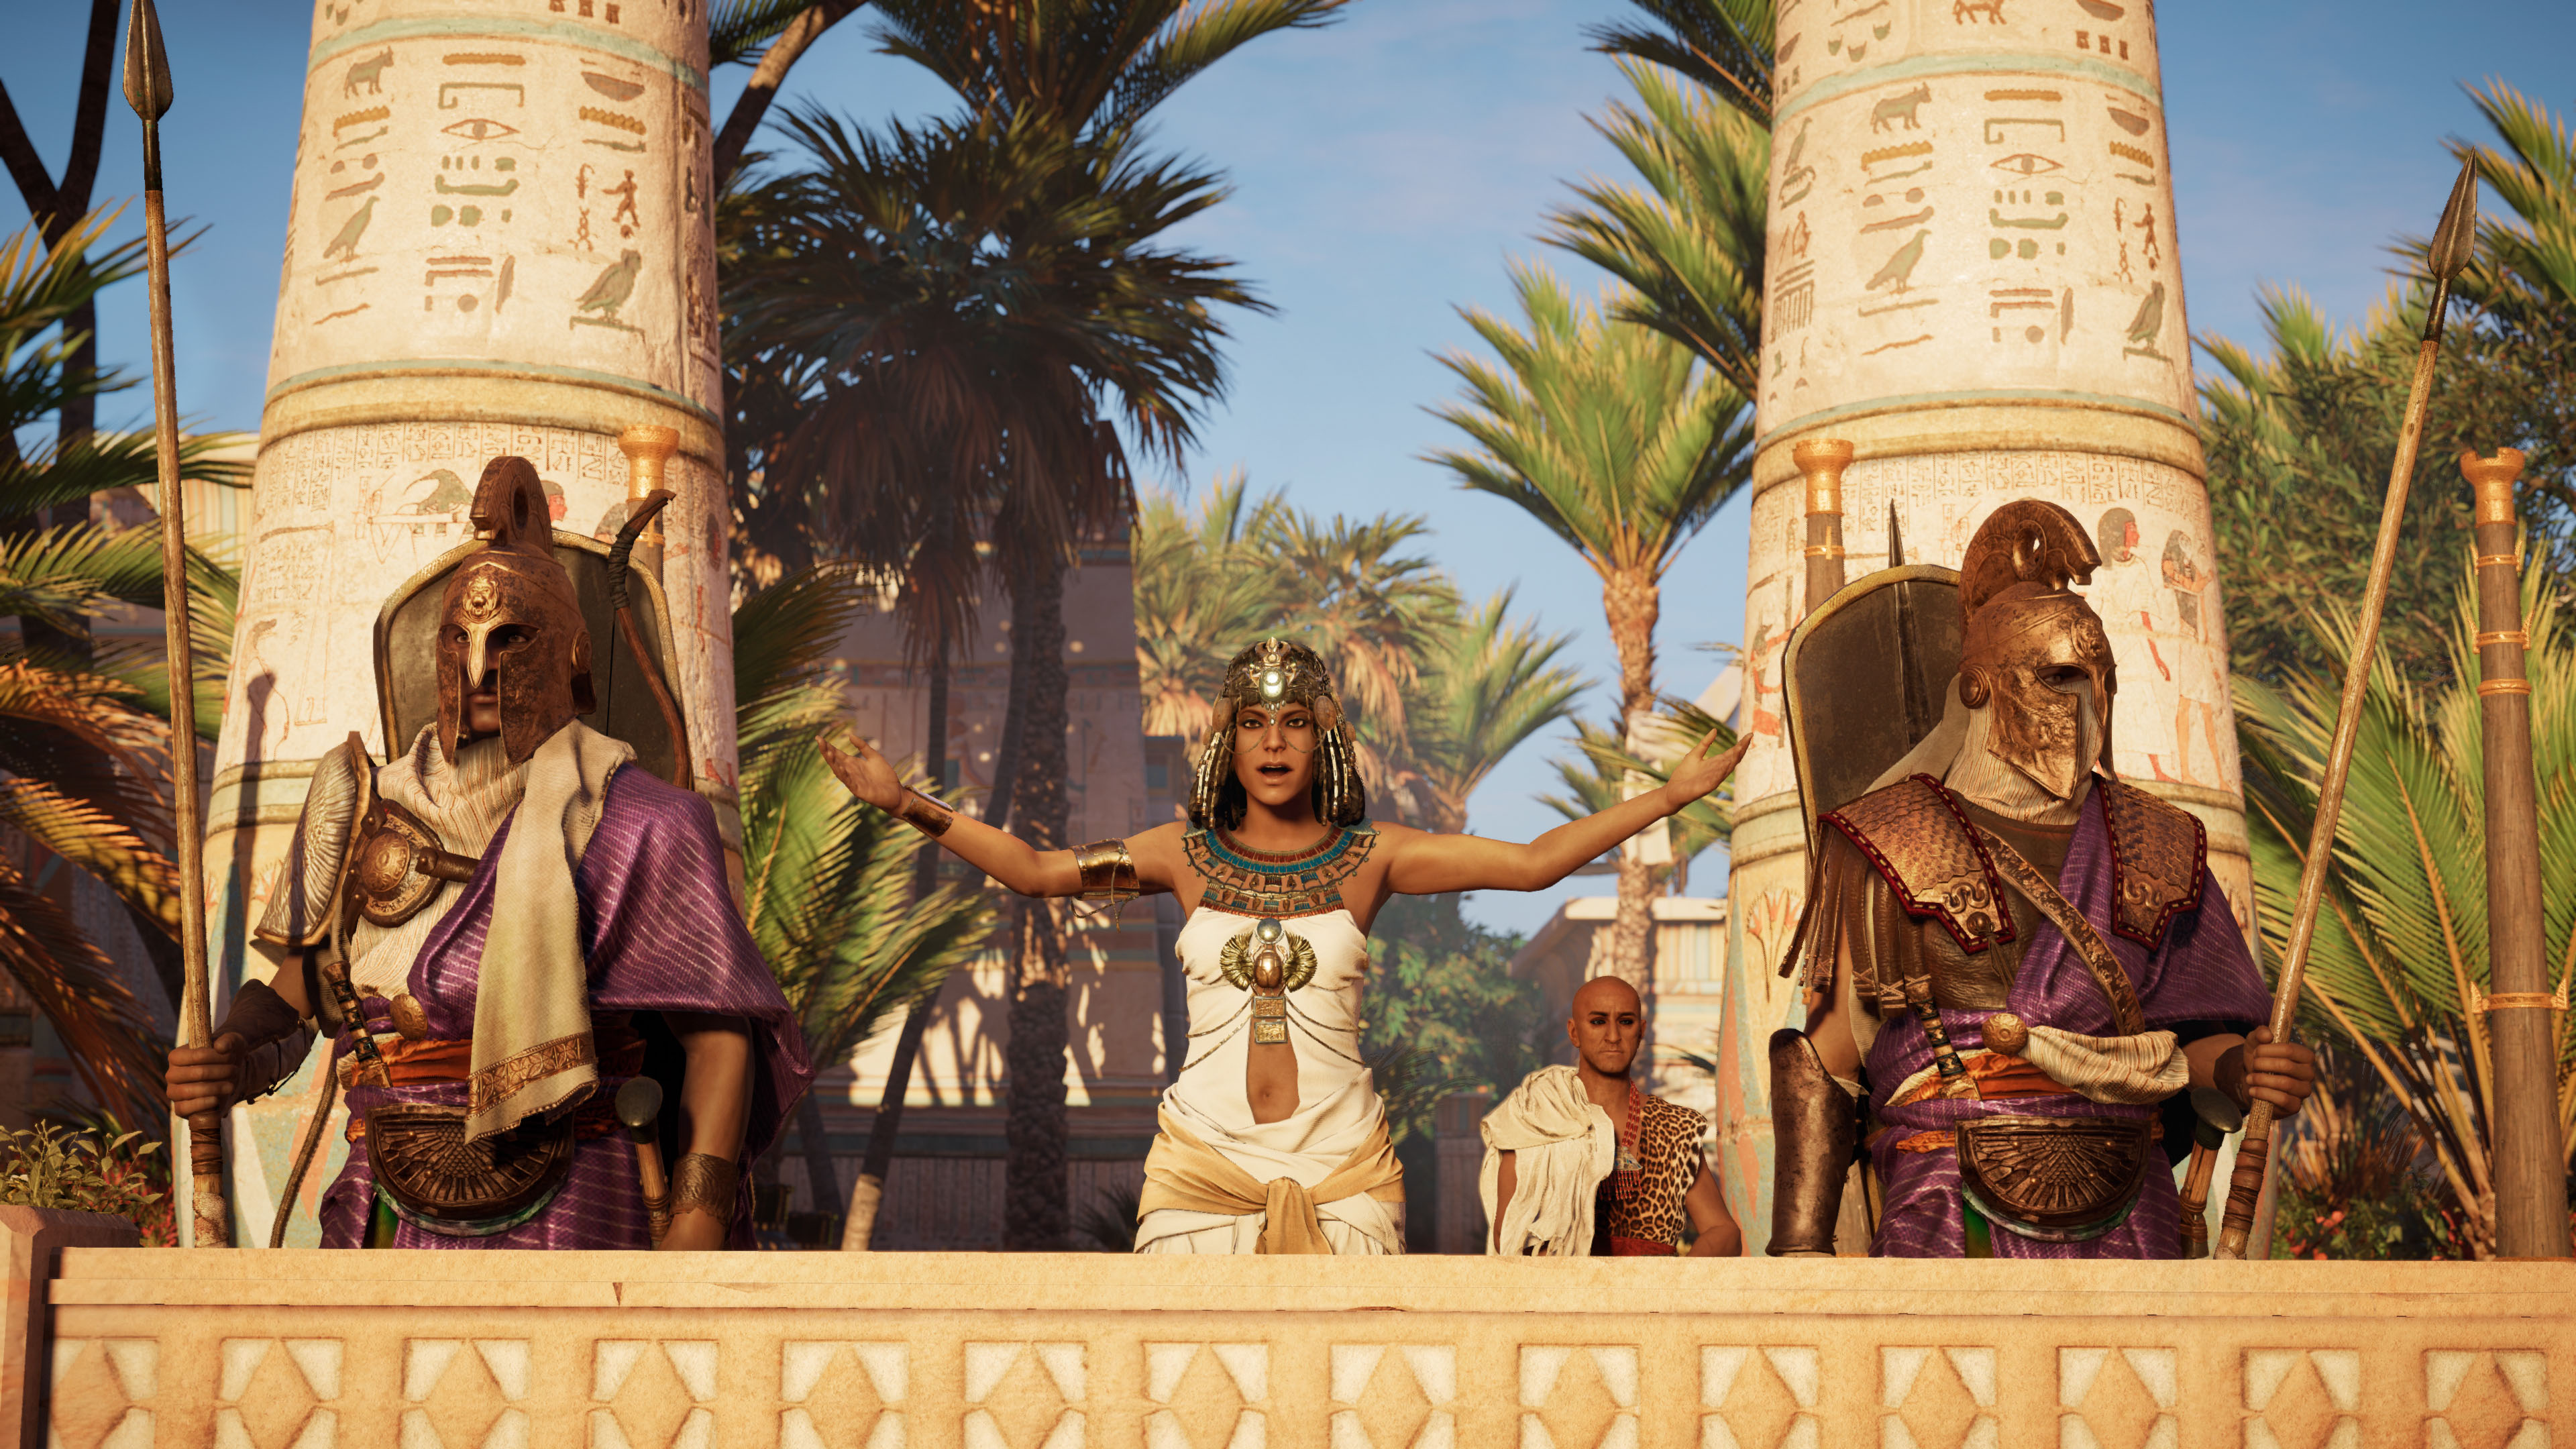 Media asset in full size related to 3dfxzone.it news item entitled as follows: Ubisoft pubblica lo story trailer e screenshot in 4K di Assassin's Creed Origins | Image Name: news26902_Assassin-s-Creed-Origins-Screenshot_2.jpg